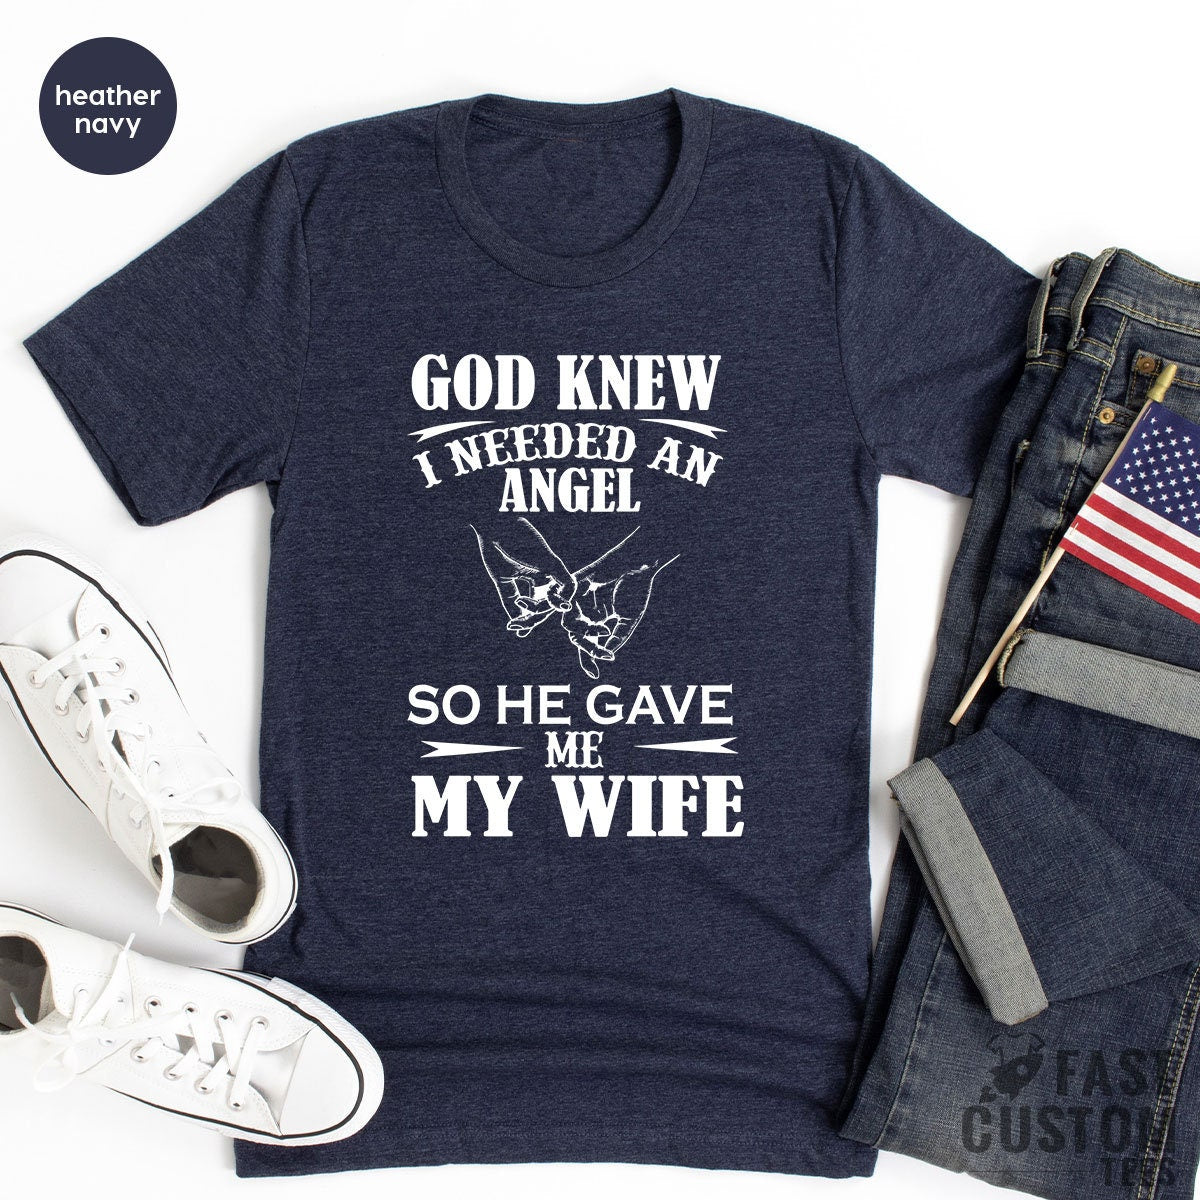 Wife Shirt, Gift For Wife, Anniversary Gift, Newlywed Gift, Wedding Gift, Shirt For Wife, Just Married Shirt, New Wife Shirt - Fastdeliverytees.com